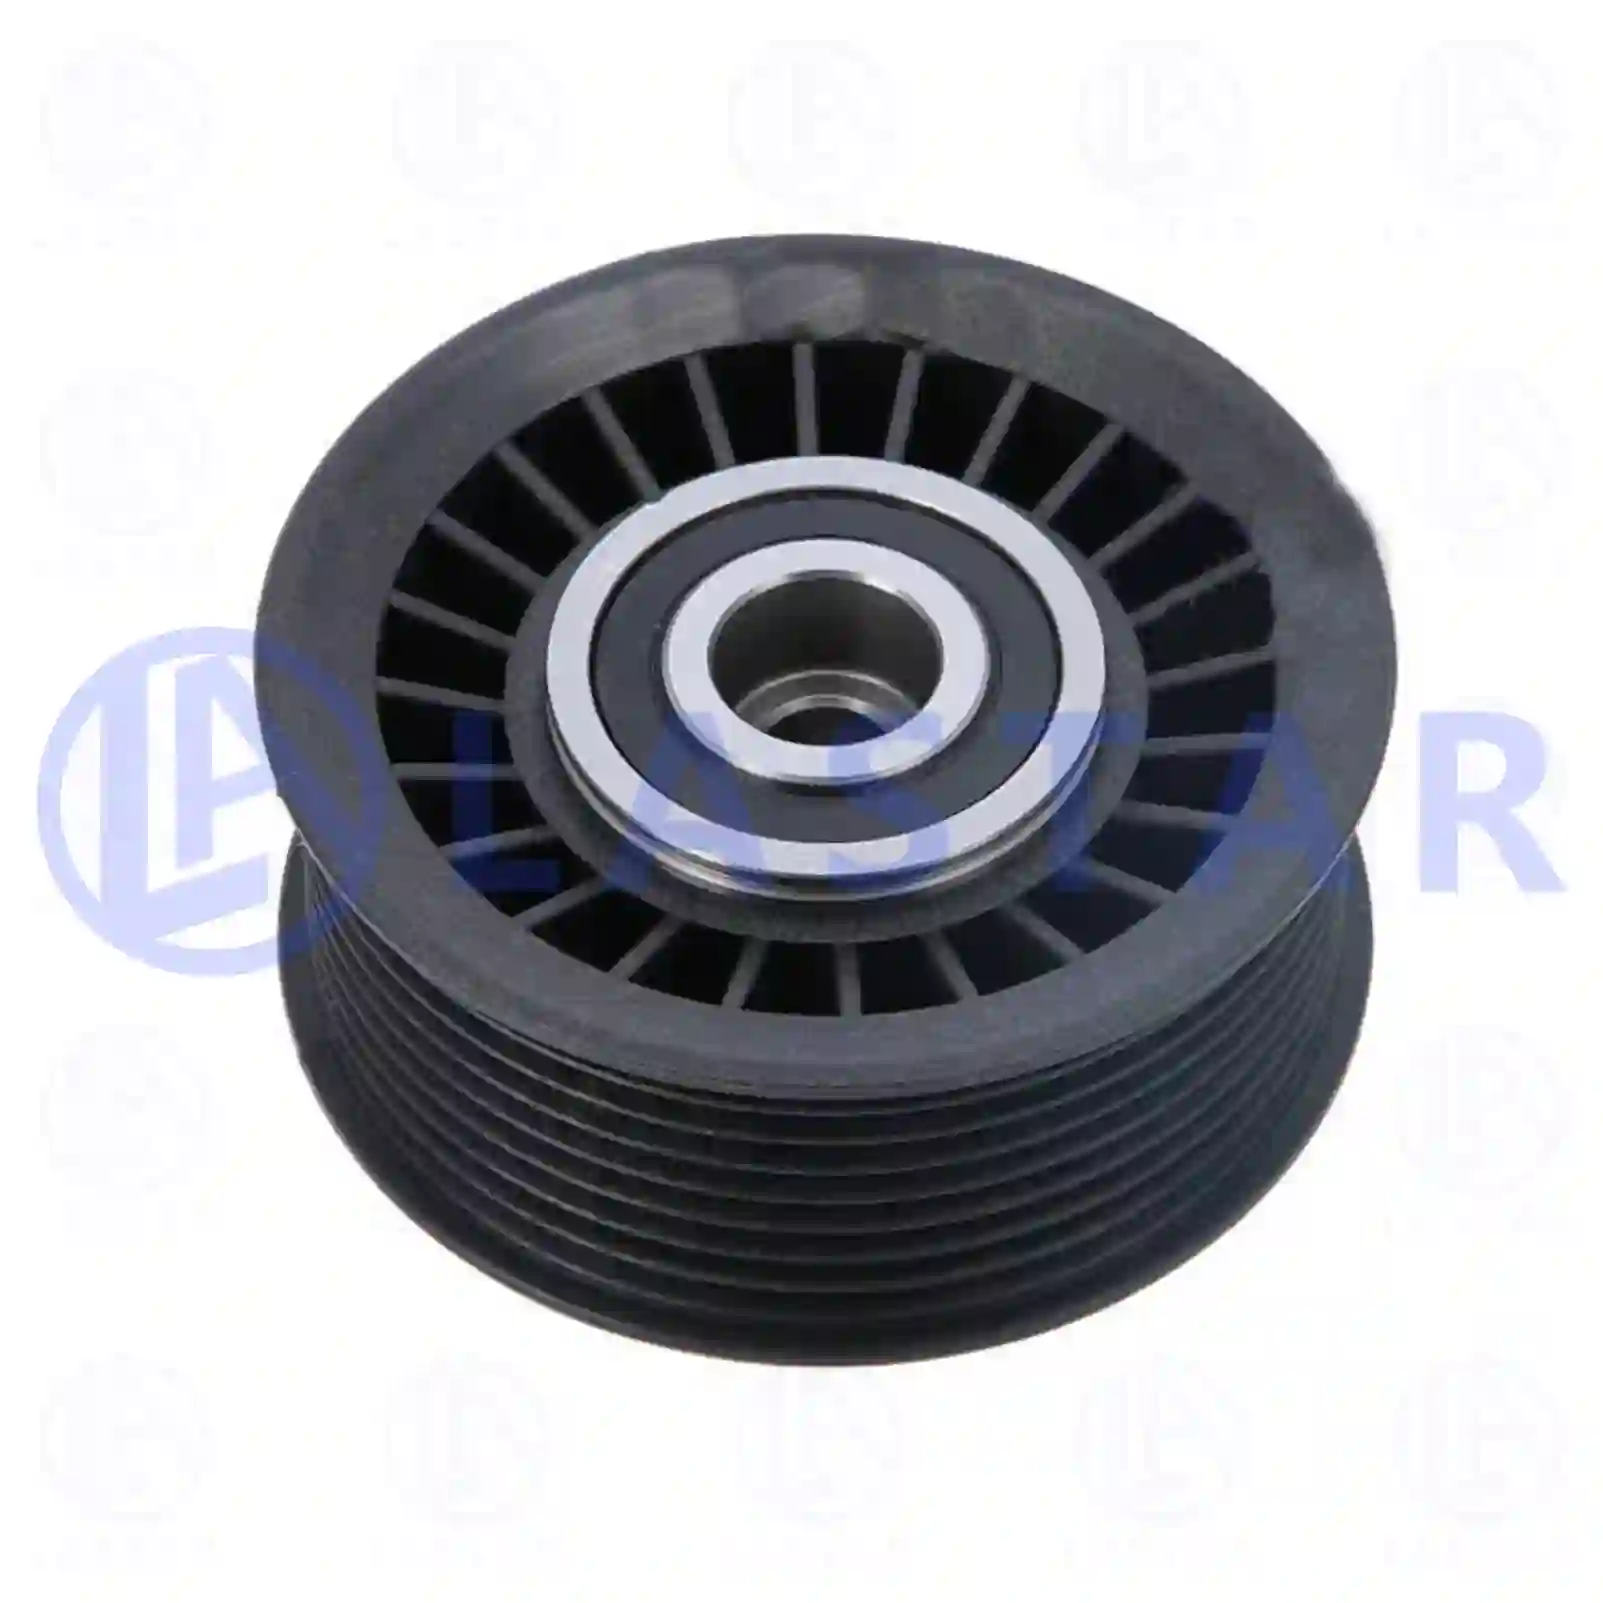 Tension roller, 77707958, 5500633 ||  77707958 Lastar Spare Part | Truck Spare Parts, Auotomotive Spare Parts Tension roller, 77707958, 5500633 ||  77707958 Lastar Spare Part | Truck Spare Parts, Auotomotive Spare Parts